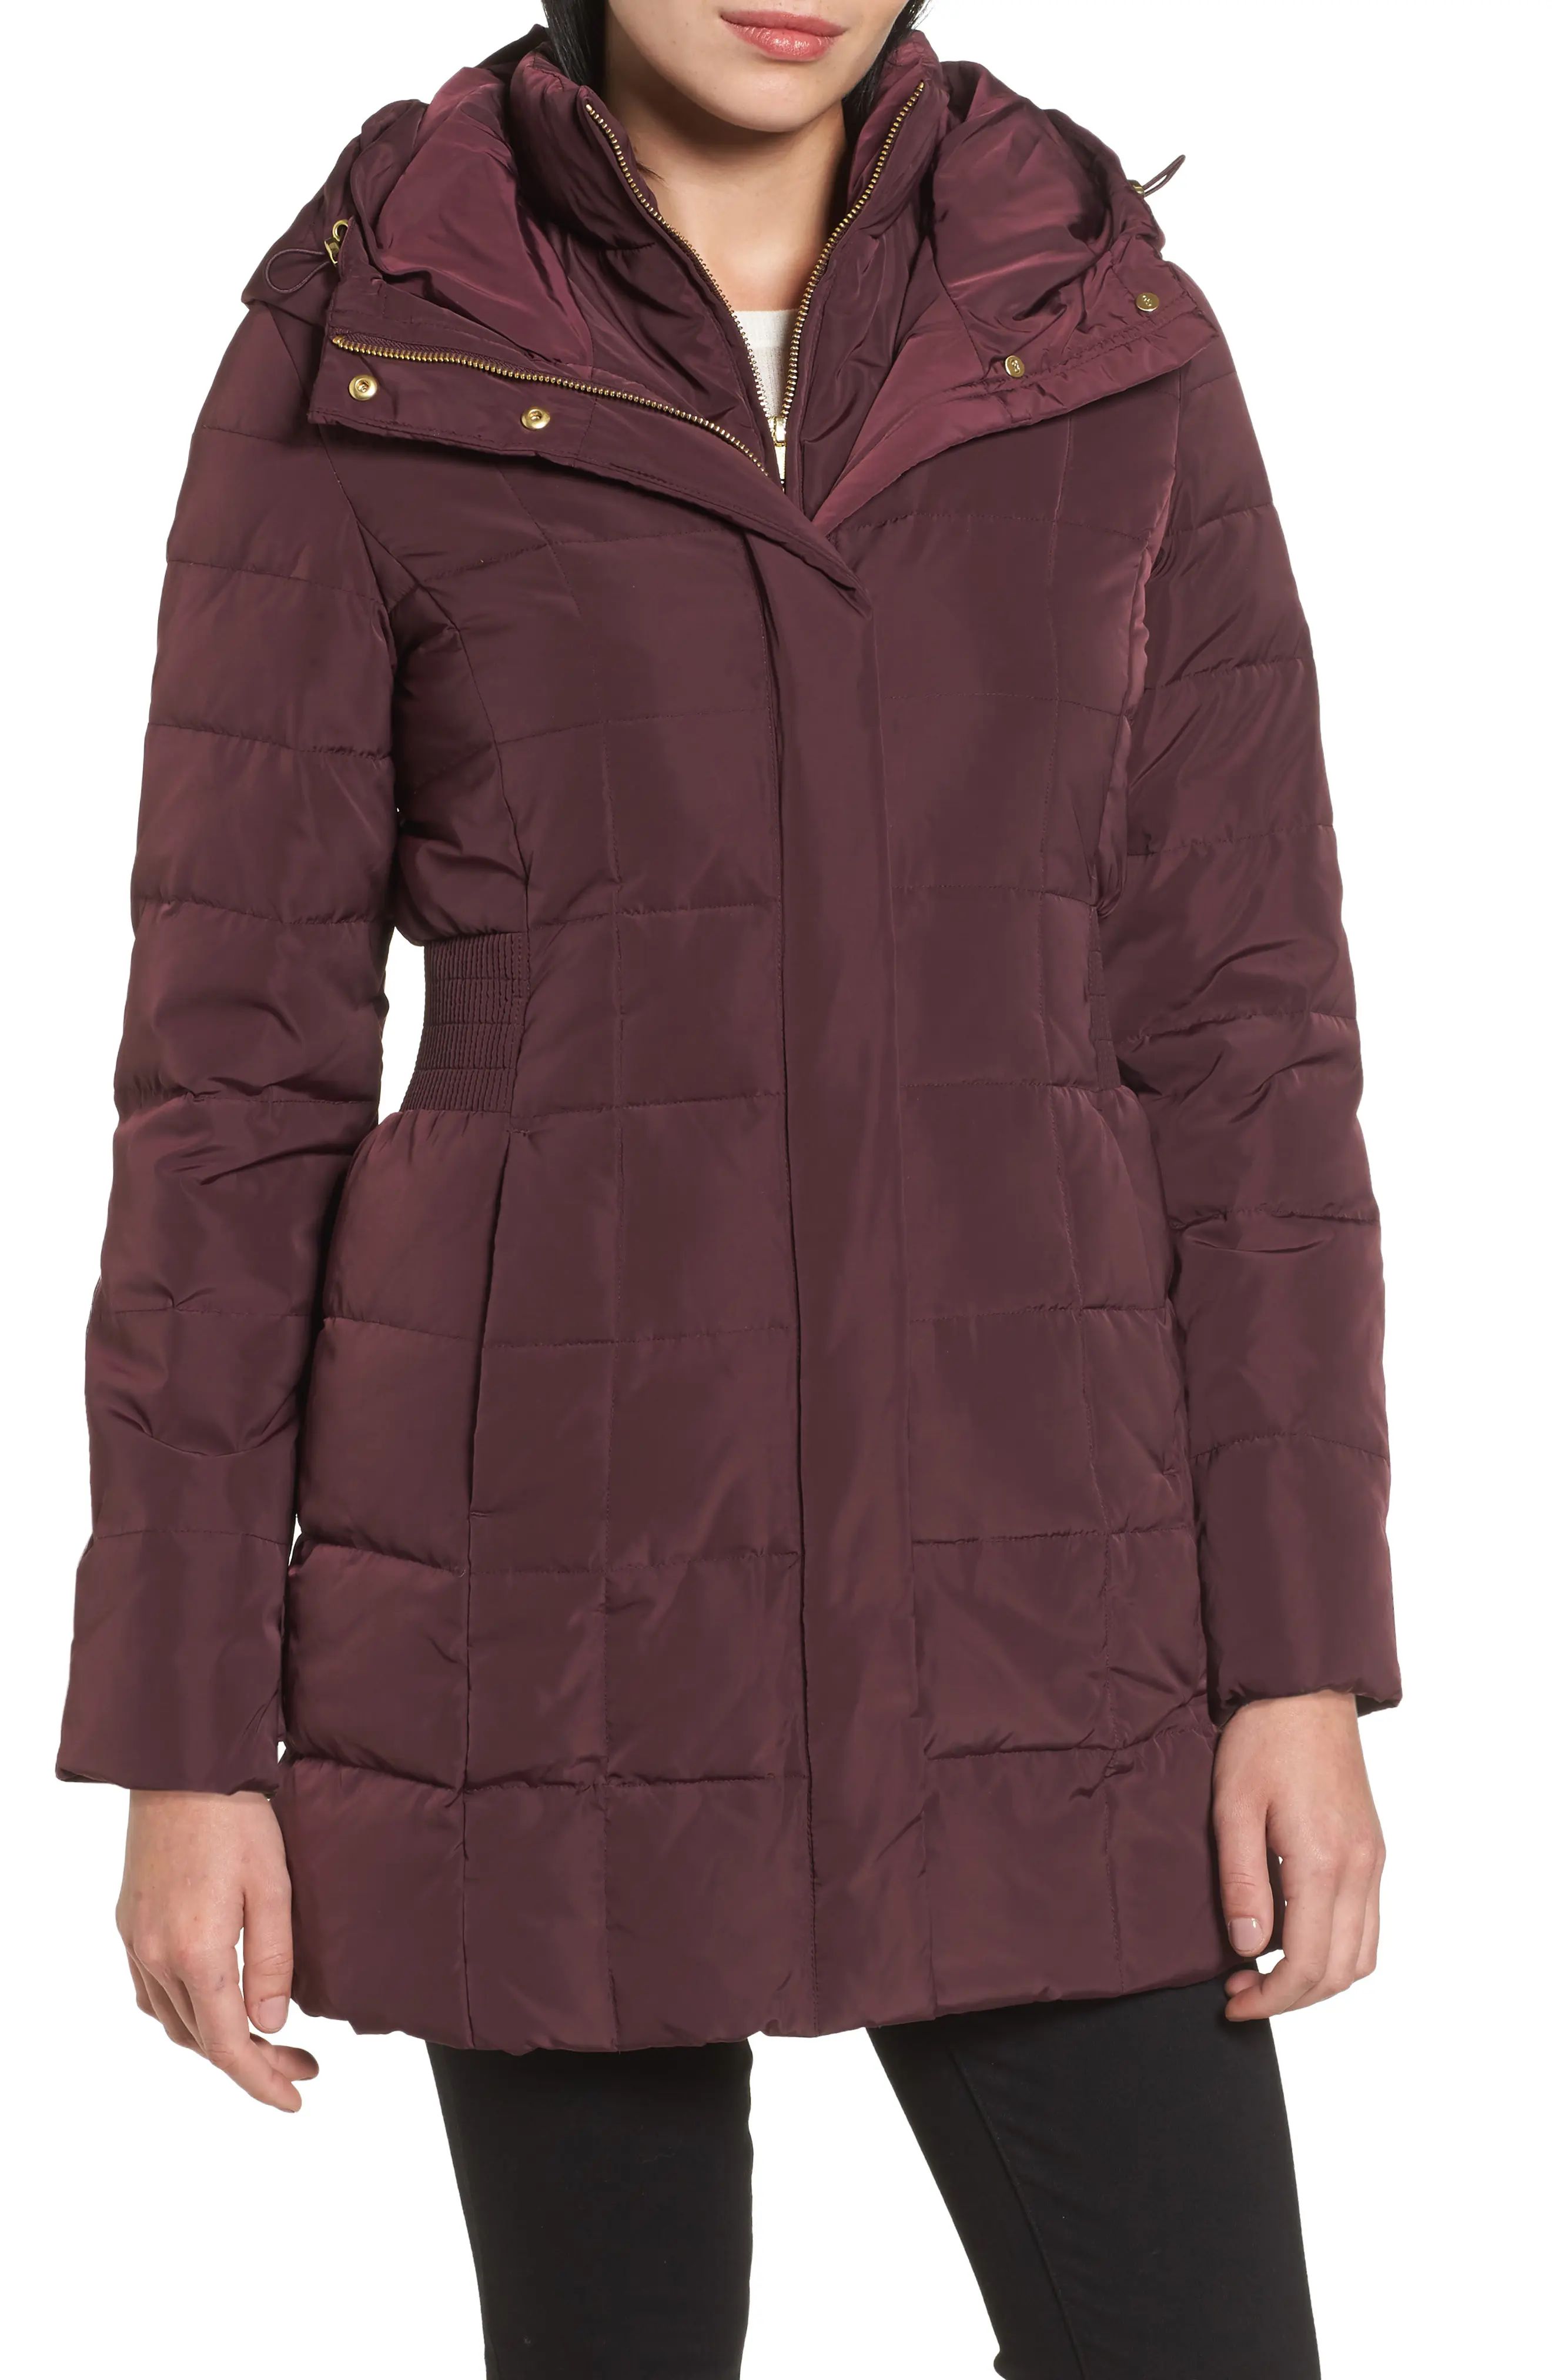 Cole Haan Signature Cole Haan Hooded Down & Feather Jacket in Merlot at Nordstrom, Size Xx-Small | Nordstrom